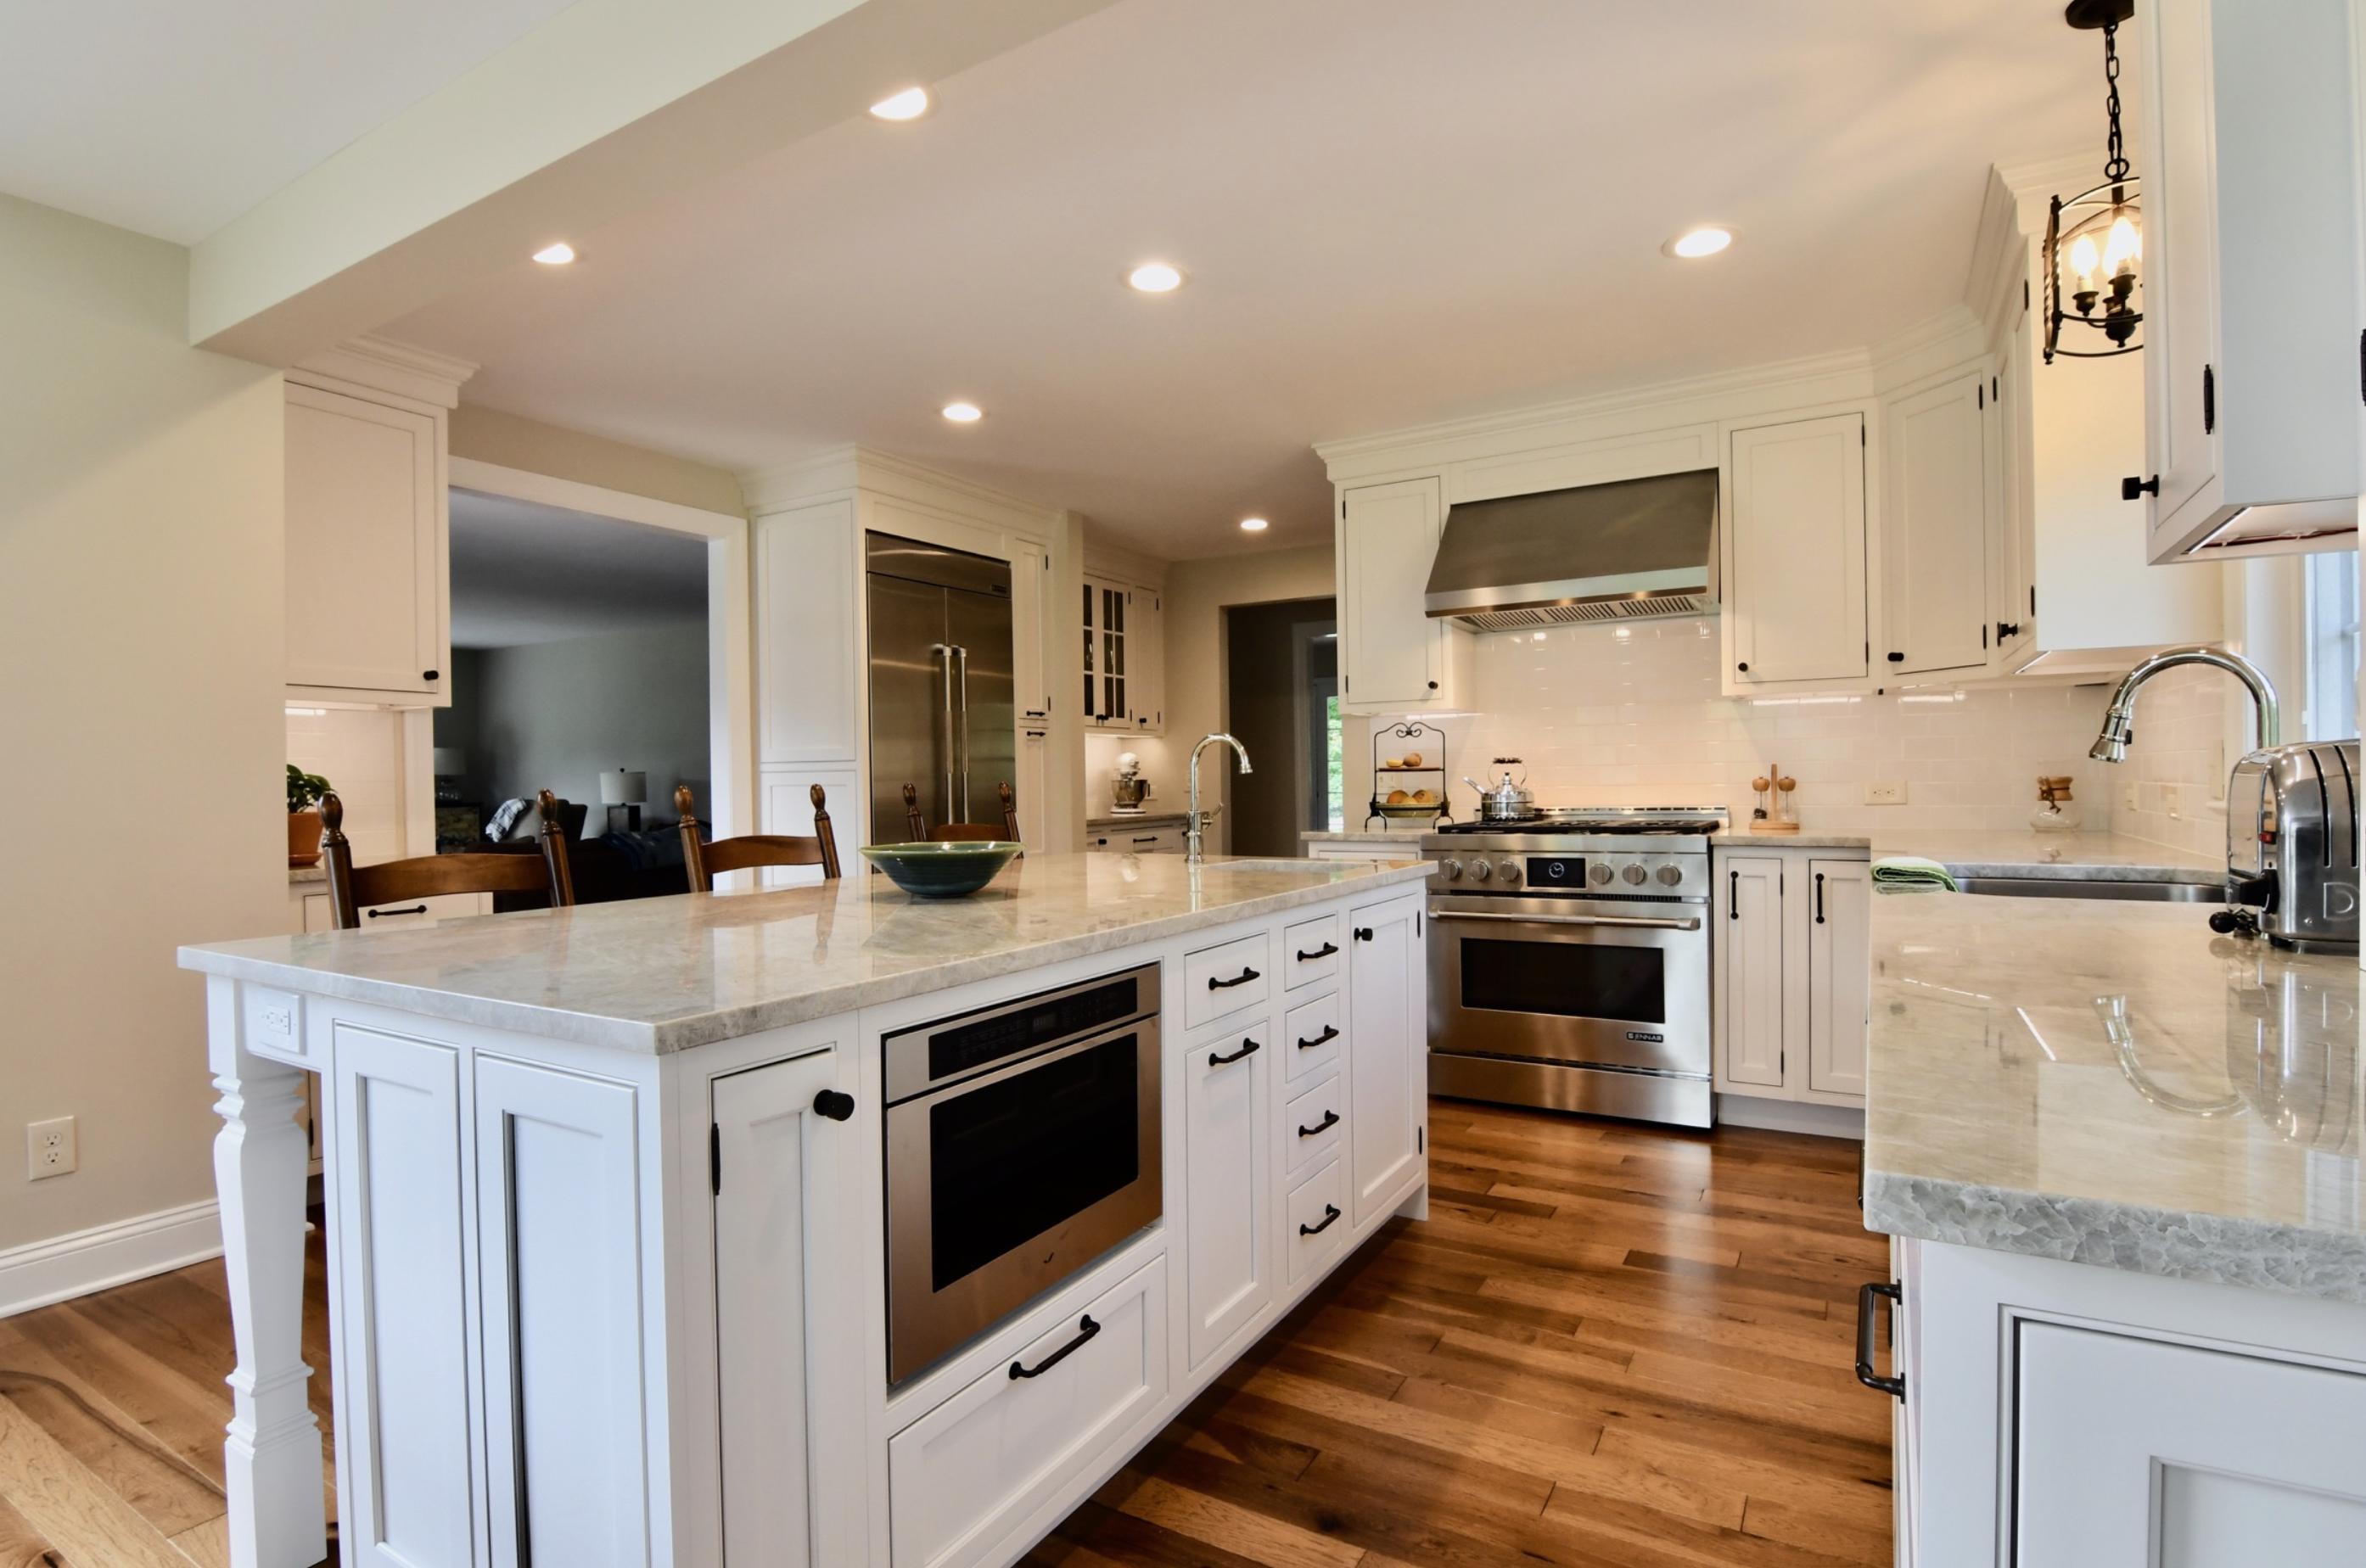 Why You Should Add More Countertop Space to Your Kitchen